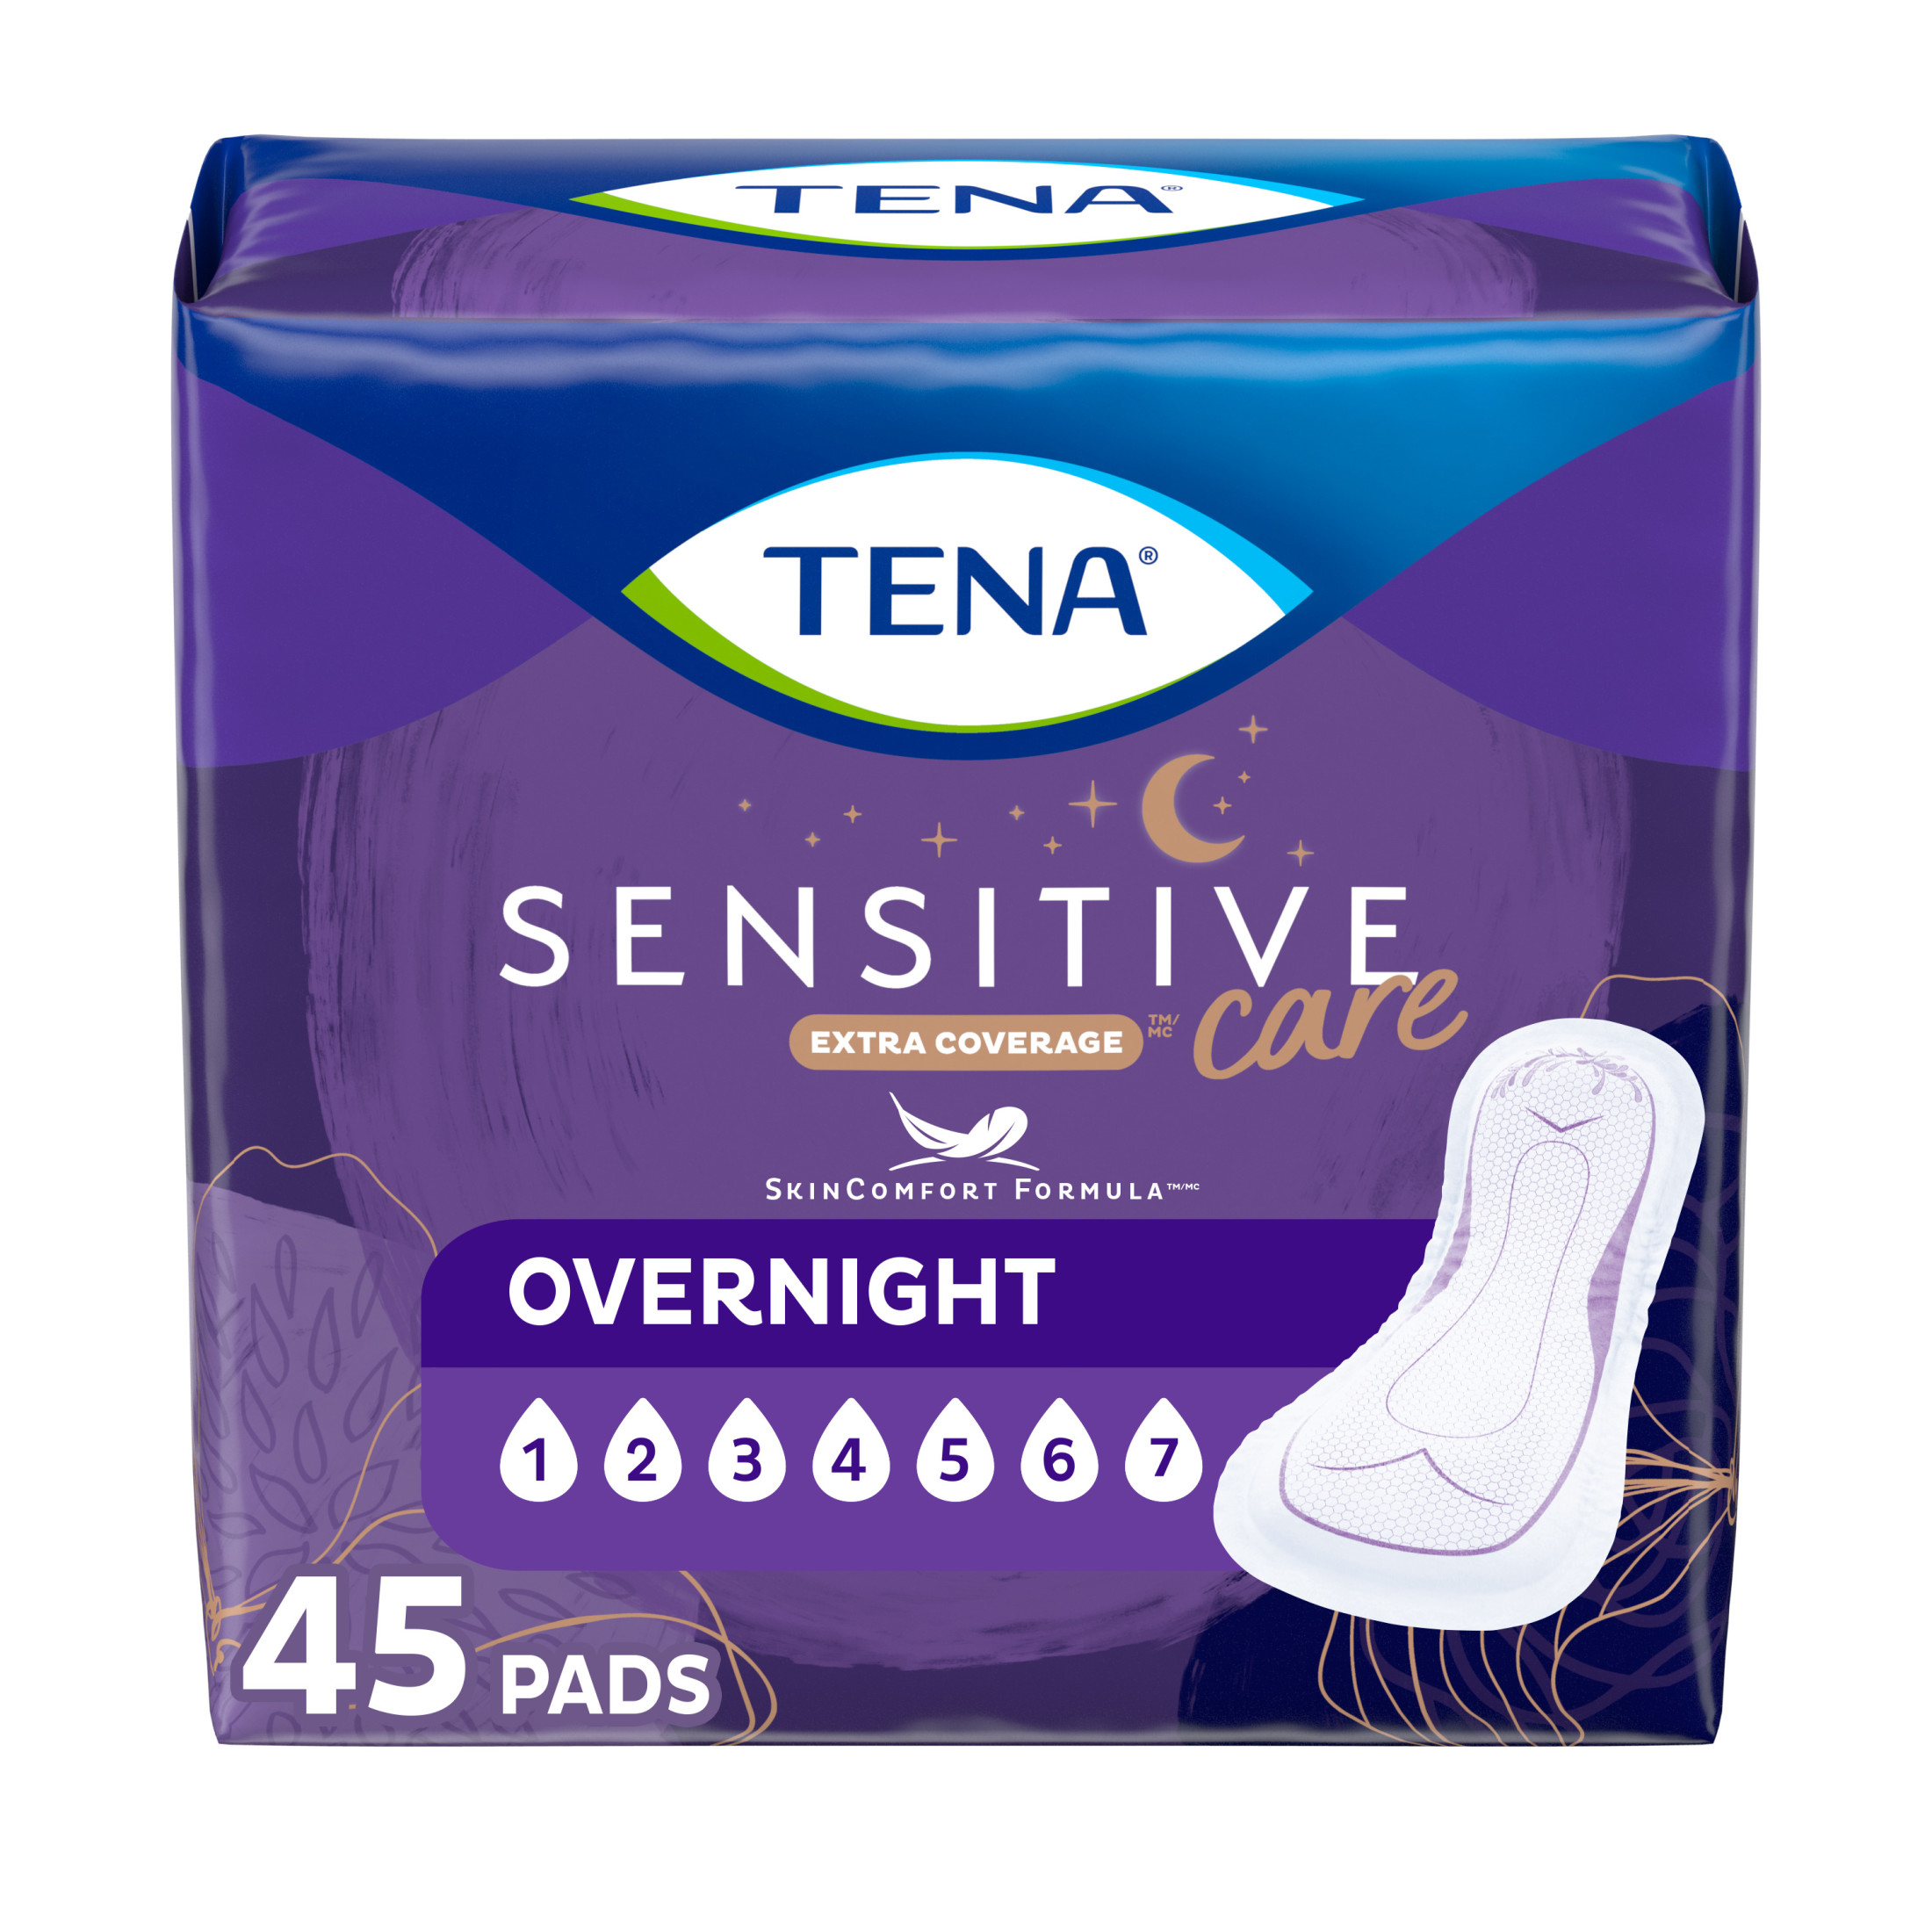 Tena Sensitive Care Extra Coverage Overnight Incontinence Pads, 45 Count - image 1 of 8